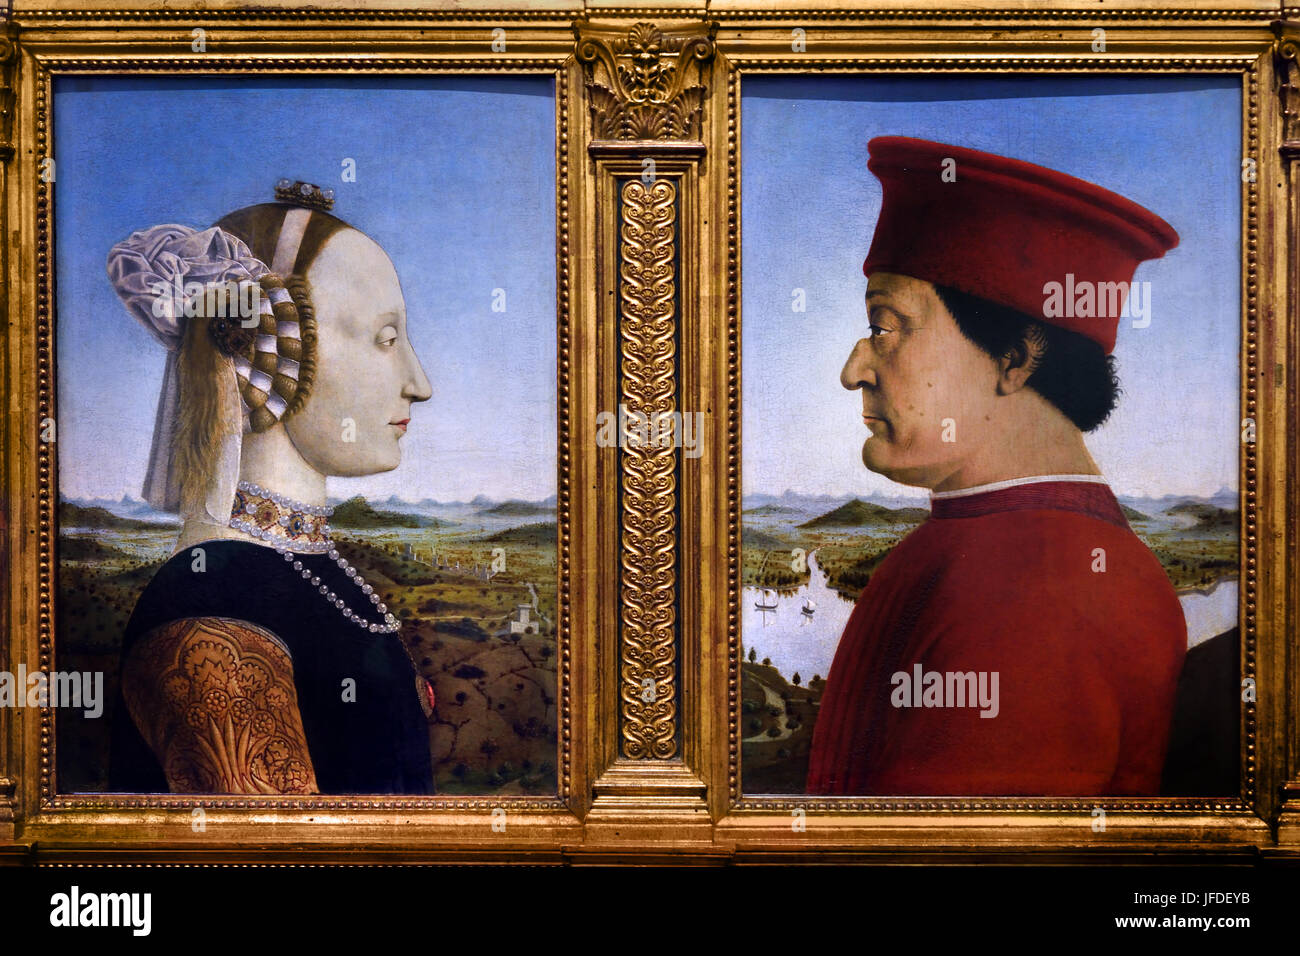 børste Abe Hængsel The Duke and Duchess of Urbino 1465-1472 Piero della Francesca 1415 - 1492)  was an Italian painter of the Early Renaissance. Italy Stock Photo - Alamy